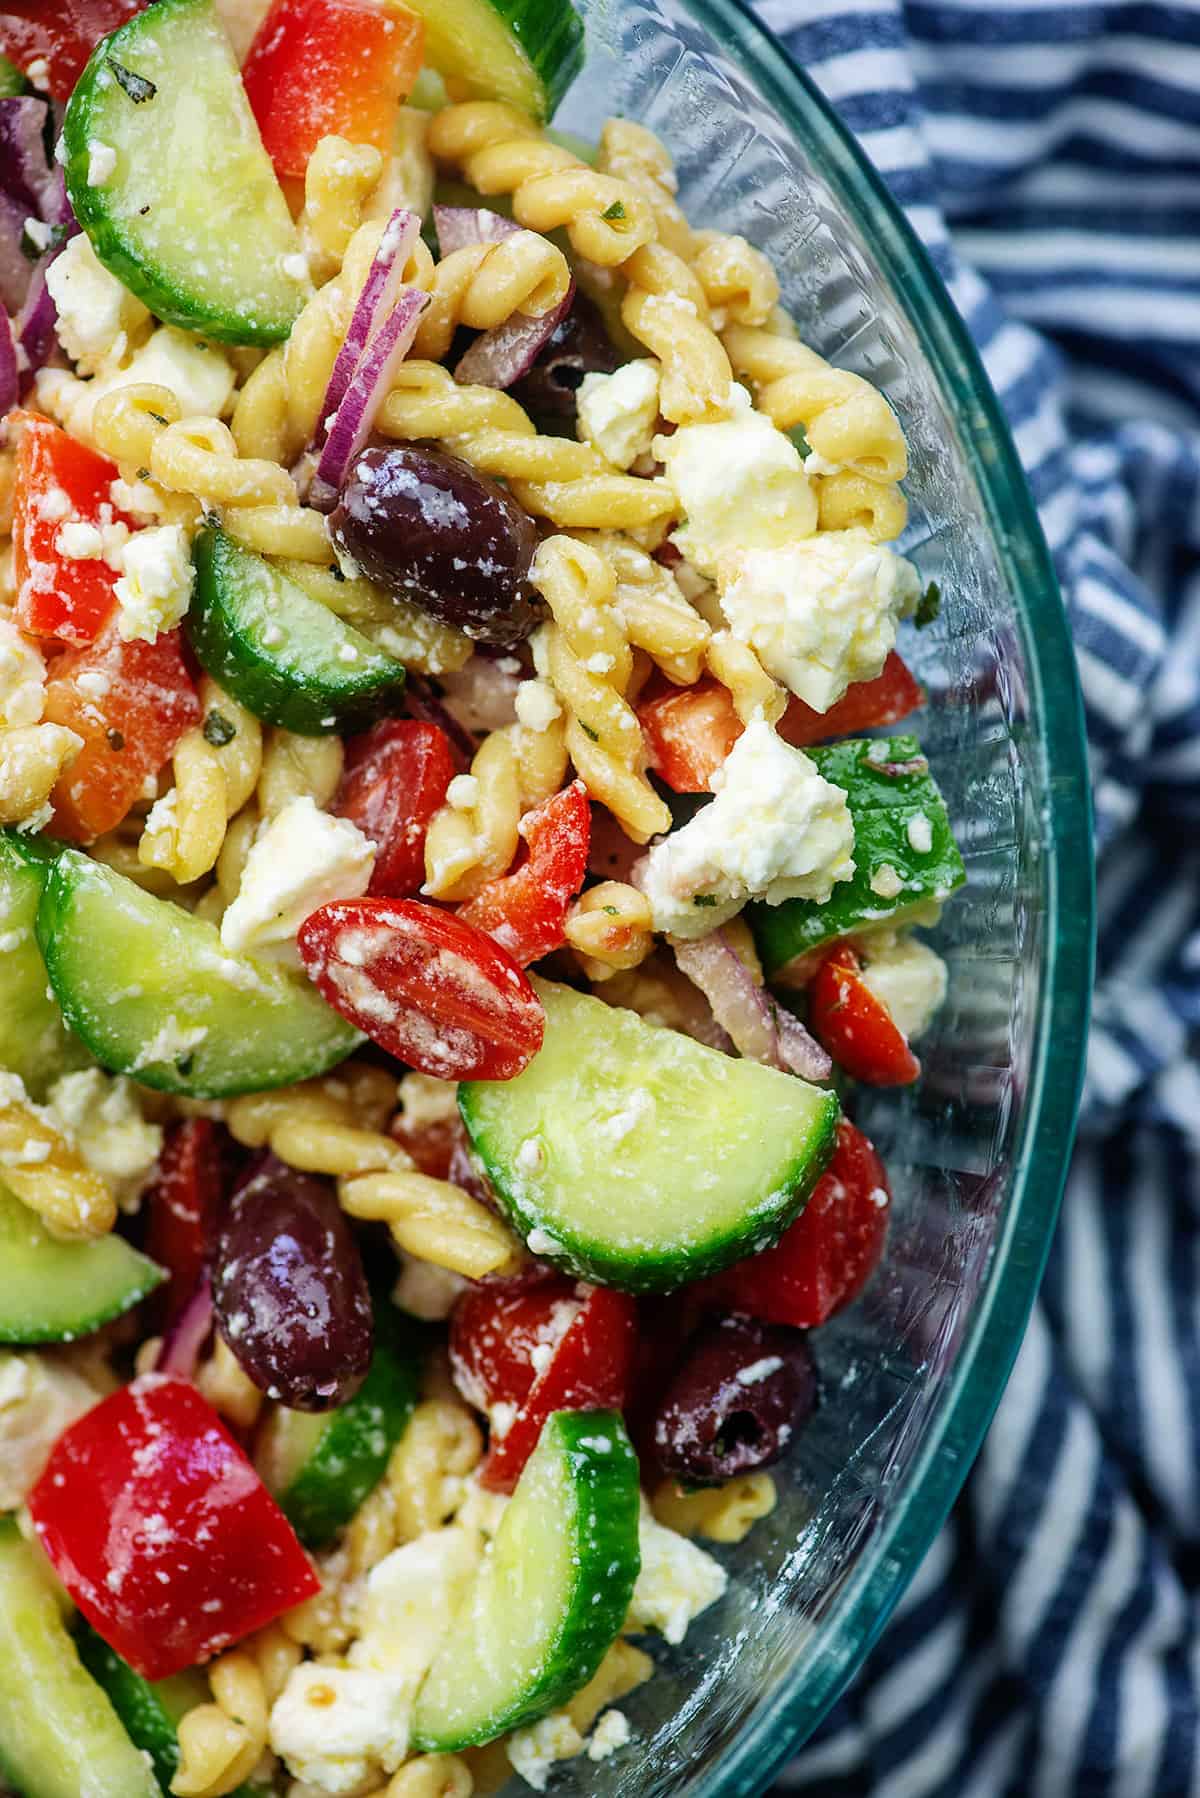 pasta salad recipe with fresh cucumbers, tomatoes, and onions in glass bowl